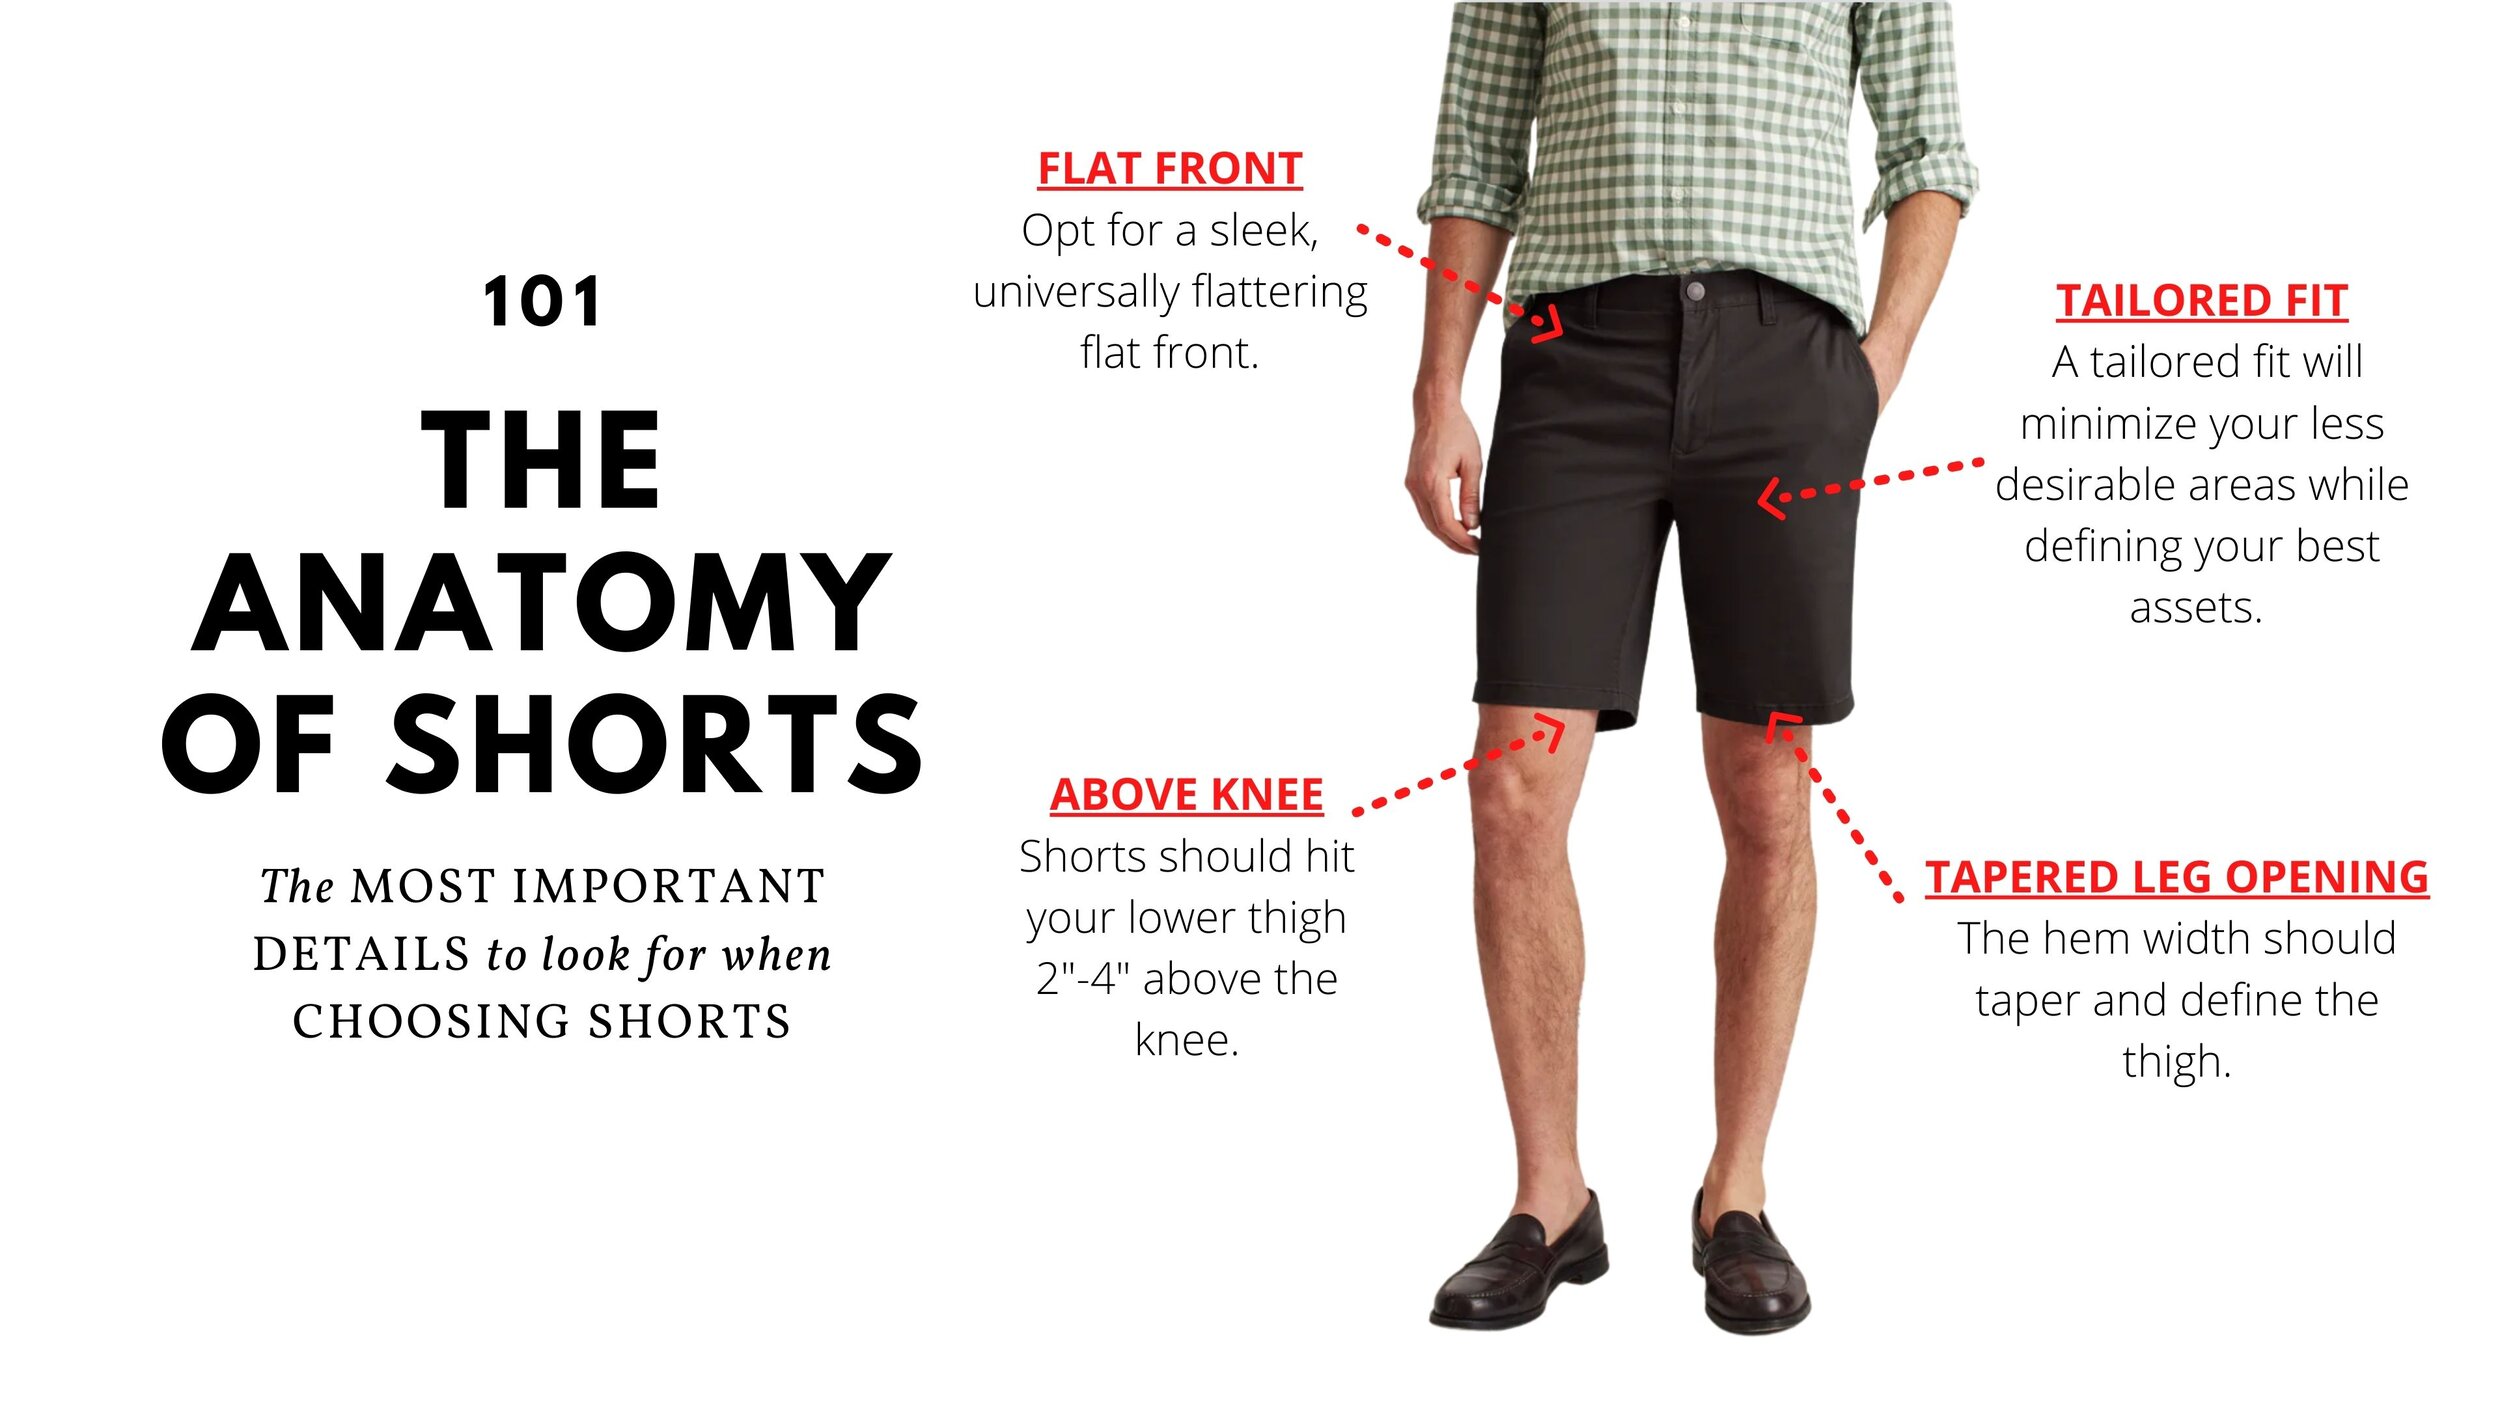 How should shorts fit properly